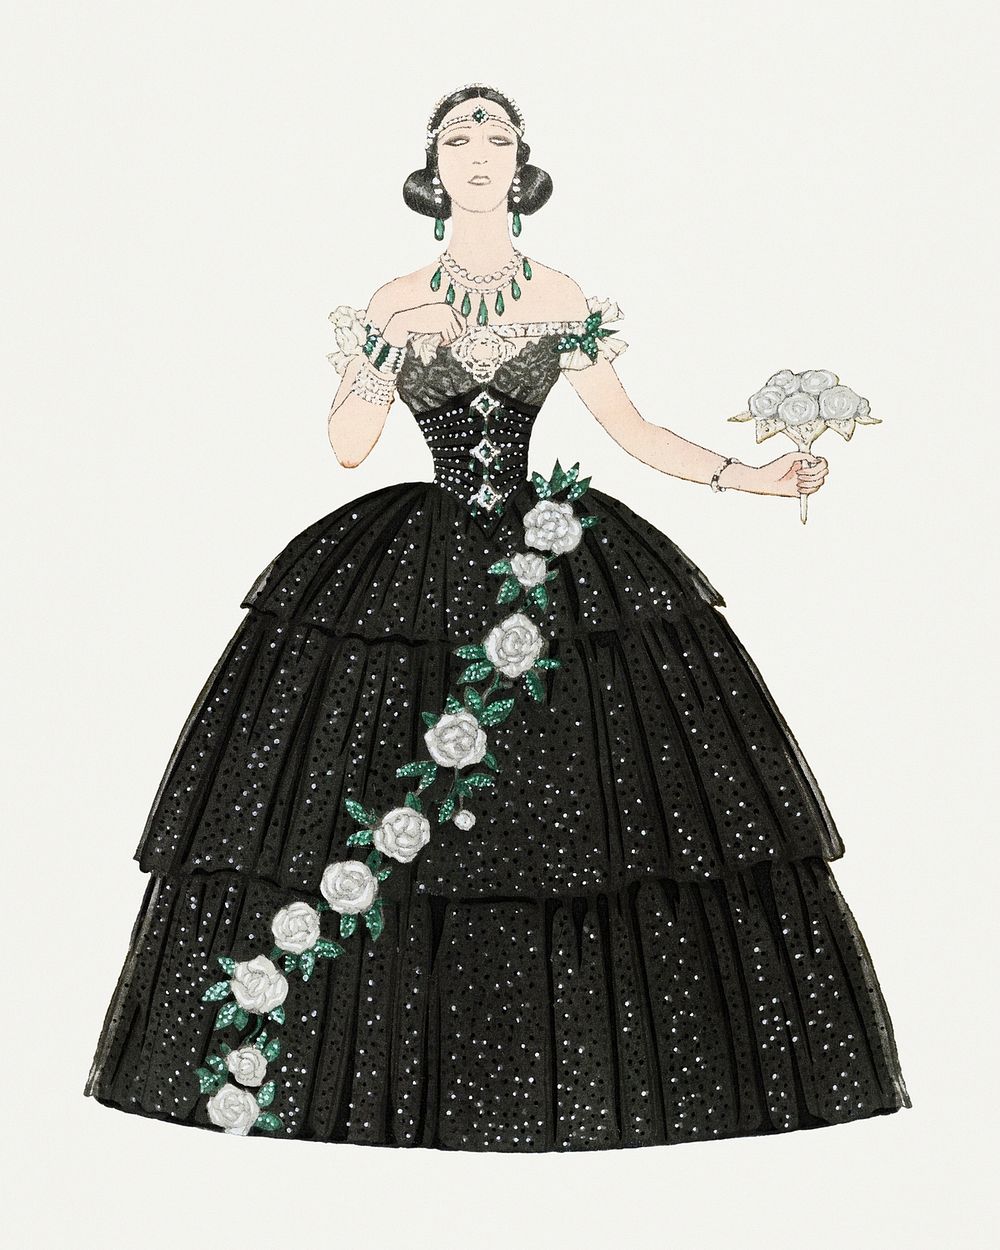 Victorian black dress psd 19th century fashion, remix from artworks by George Barbier